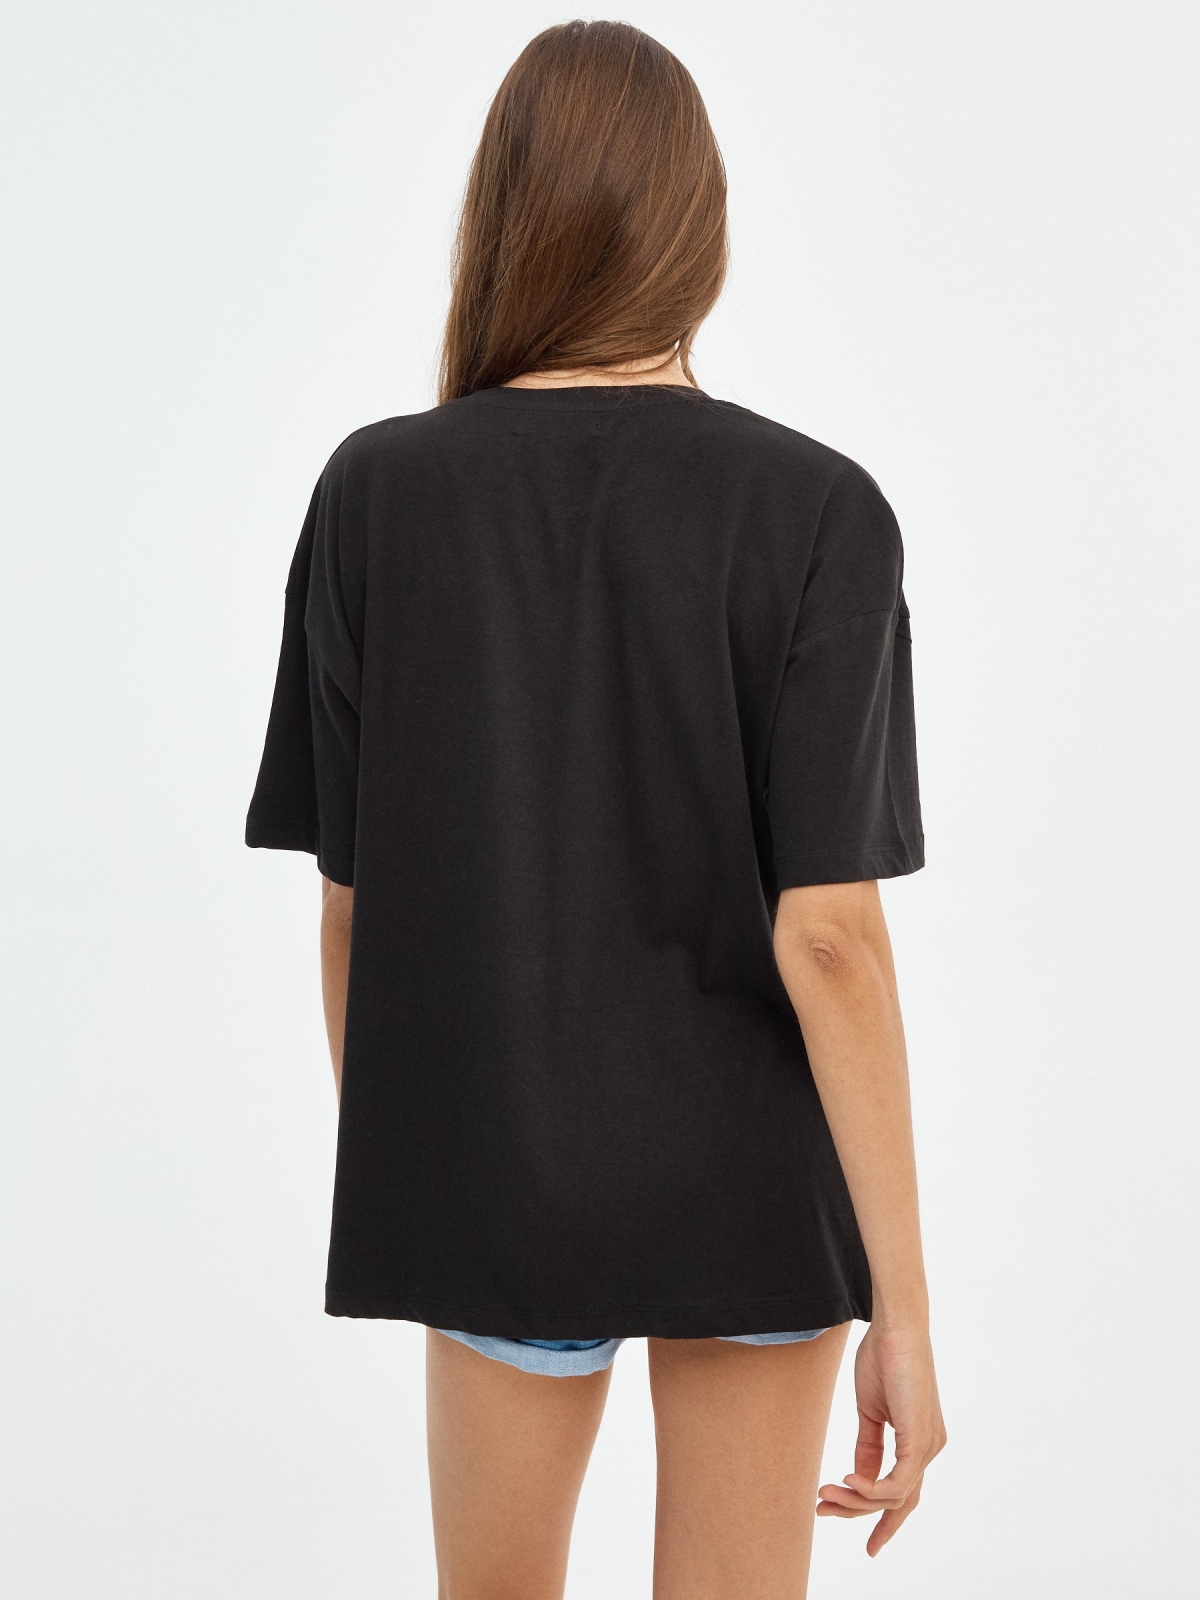 Oversized T-shirt Holiday Error black middle back view